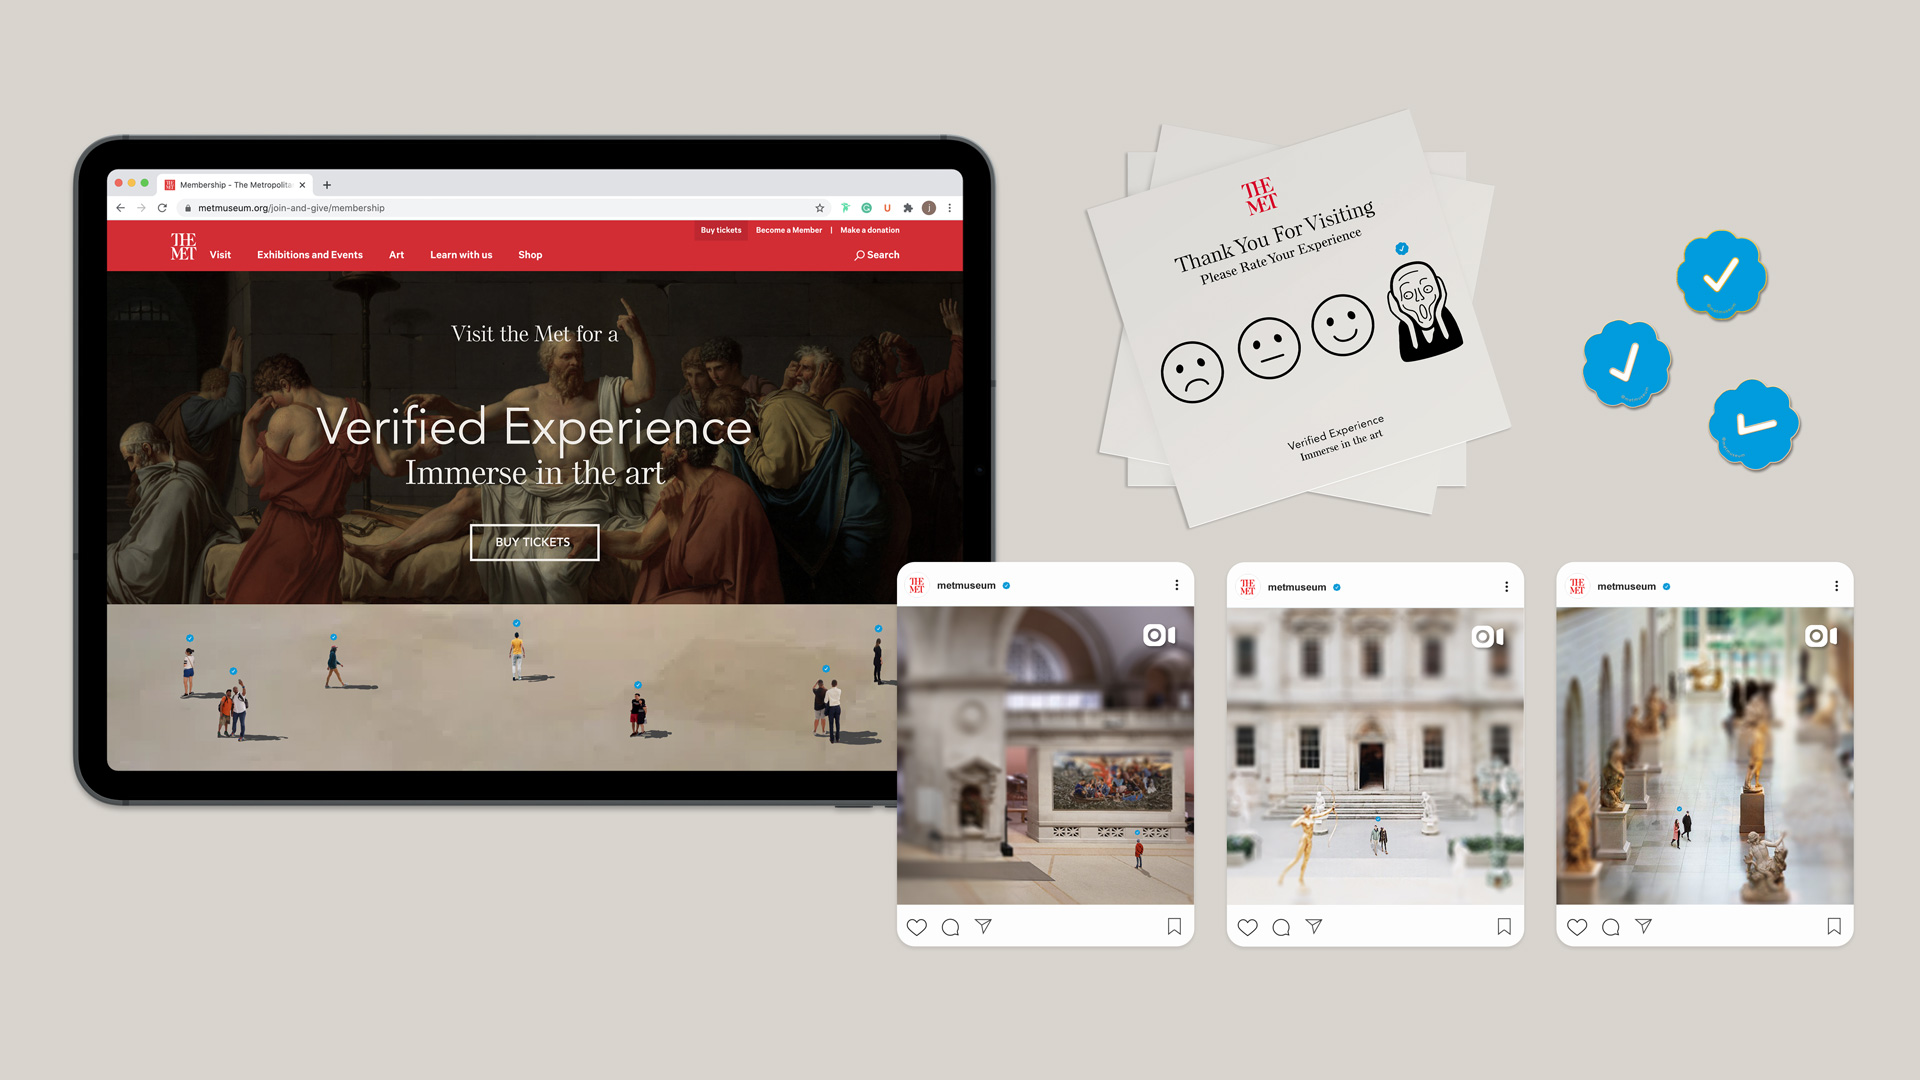 The Verified Experience advertising campaign, encourages Gen Z to visit the Metropolitan Museum of Art in person.